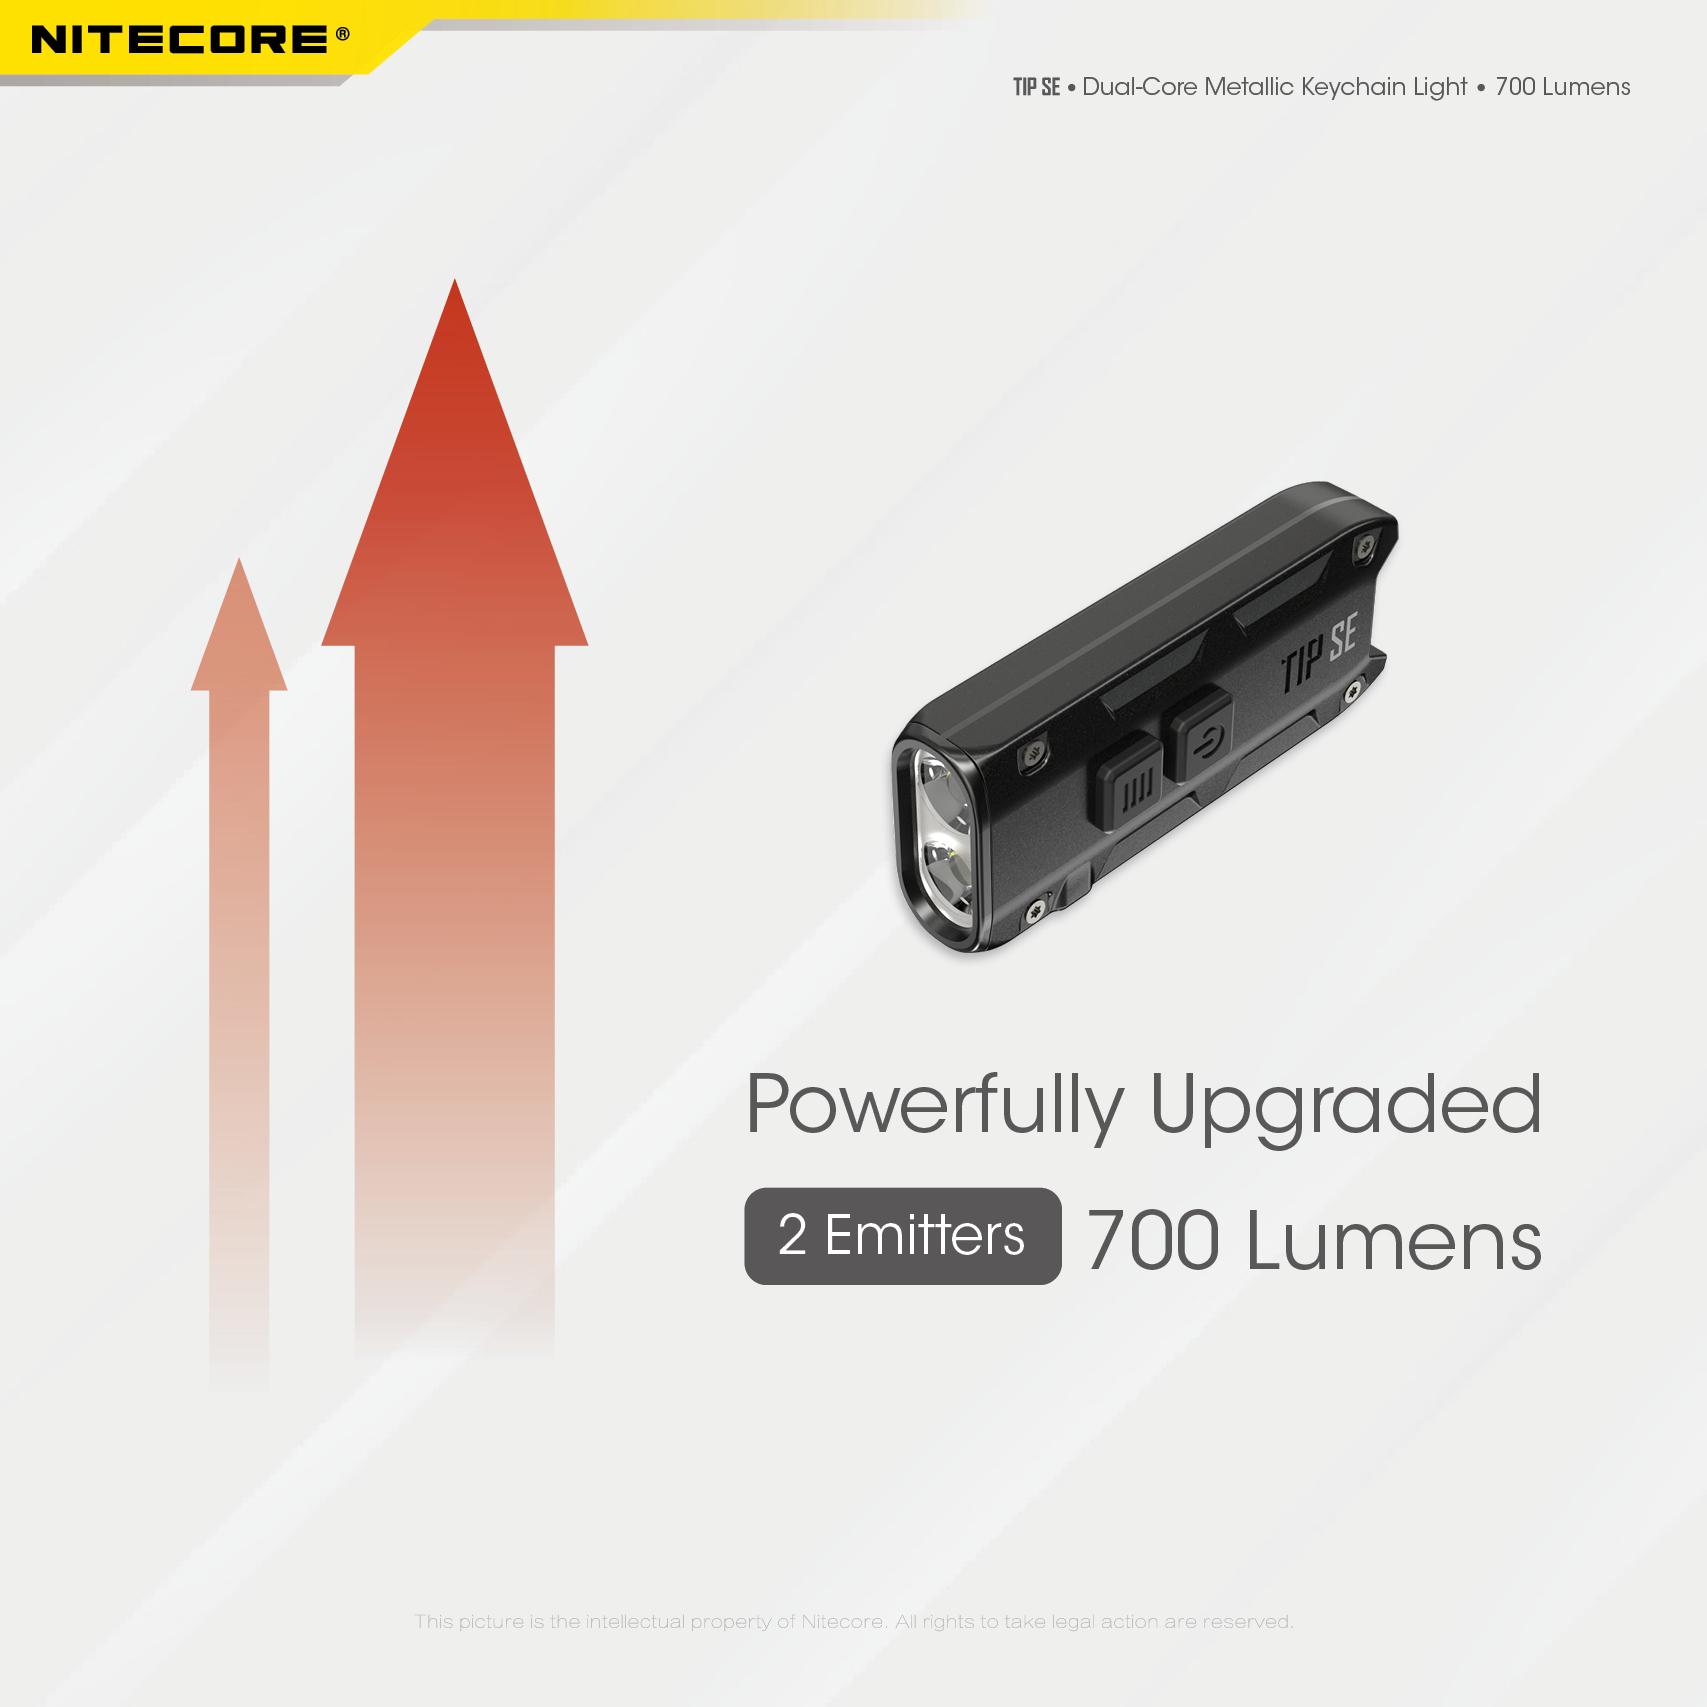 NITECORE-TIP-SE-700LM-P8-Dual-Light-LED-Keychain-Flashlight-Type-C-Rechargeable-QC-Every-Day-Carry-M-1976045-2